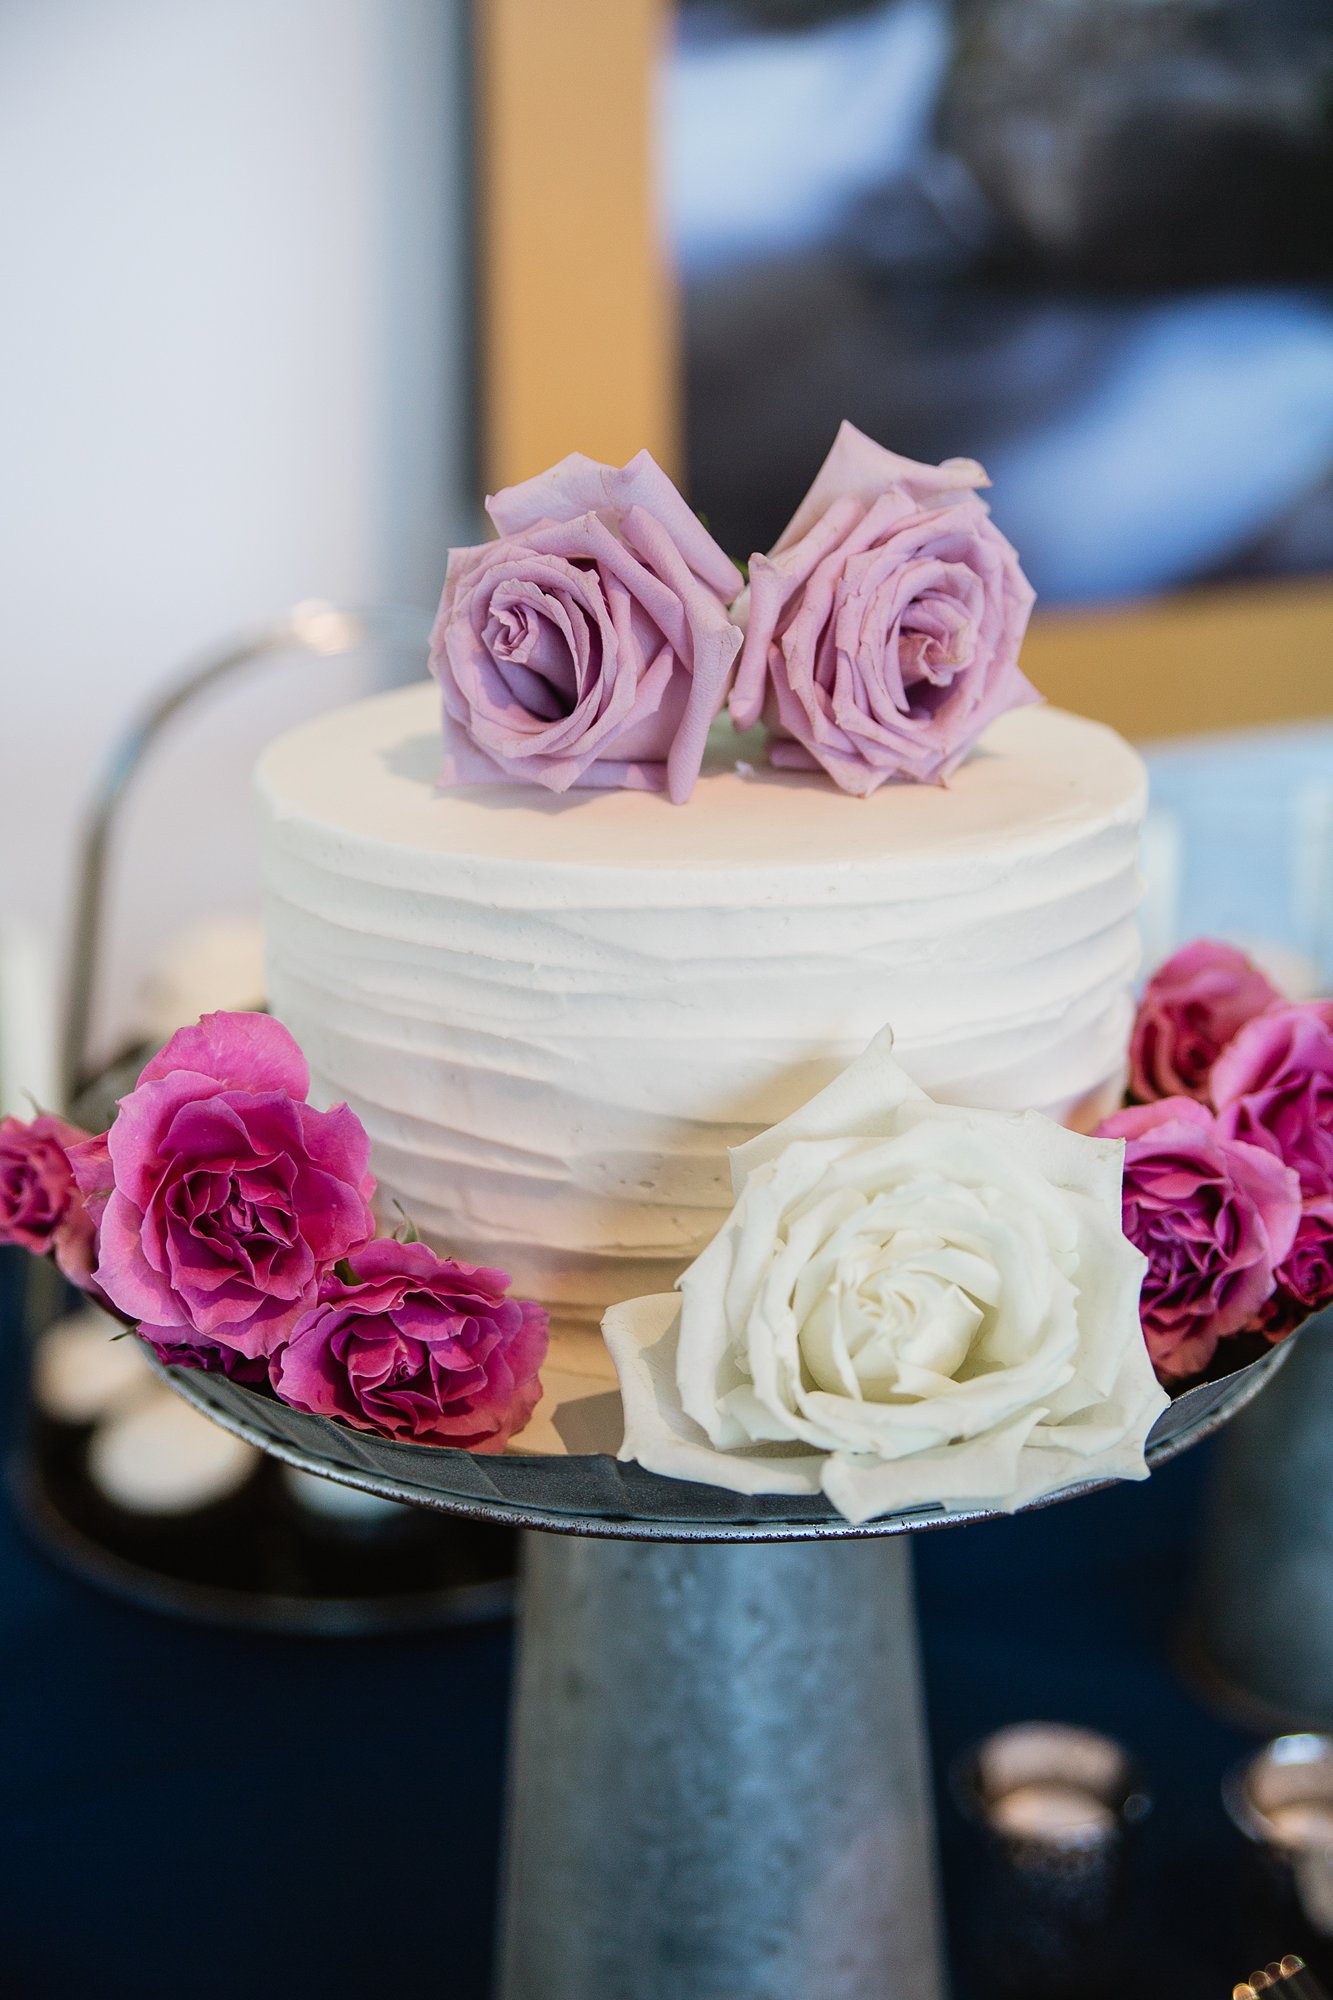 Simple white wedding cake topped with white lavender and pink roses.